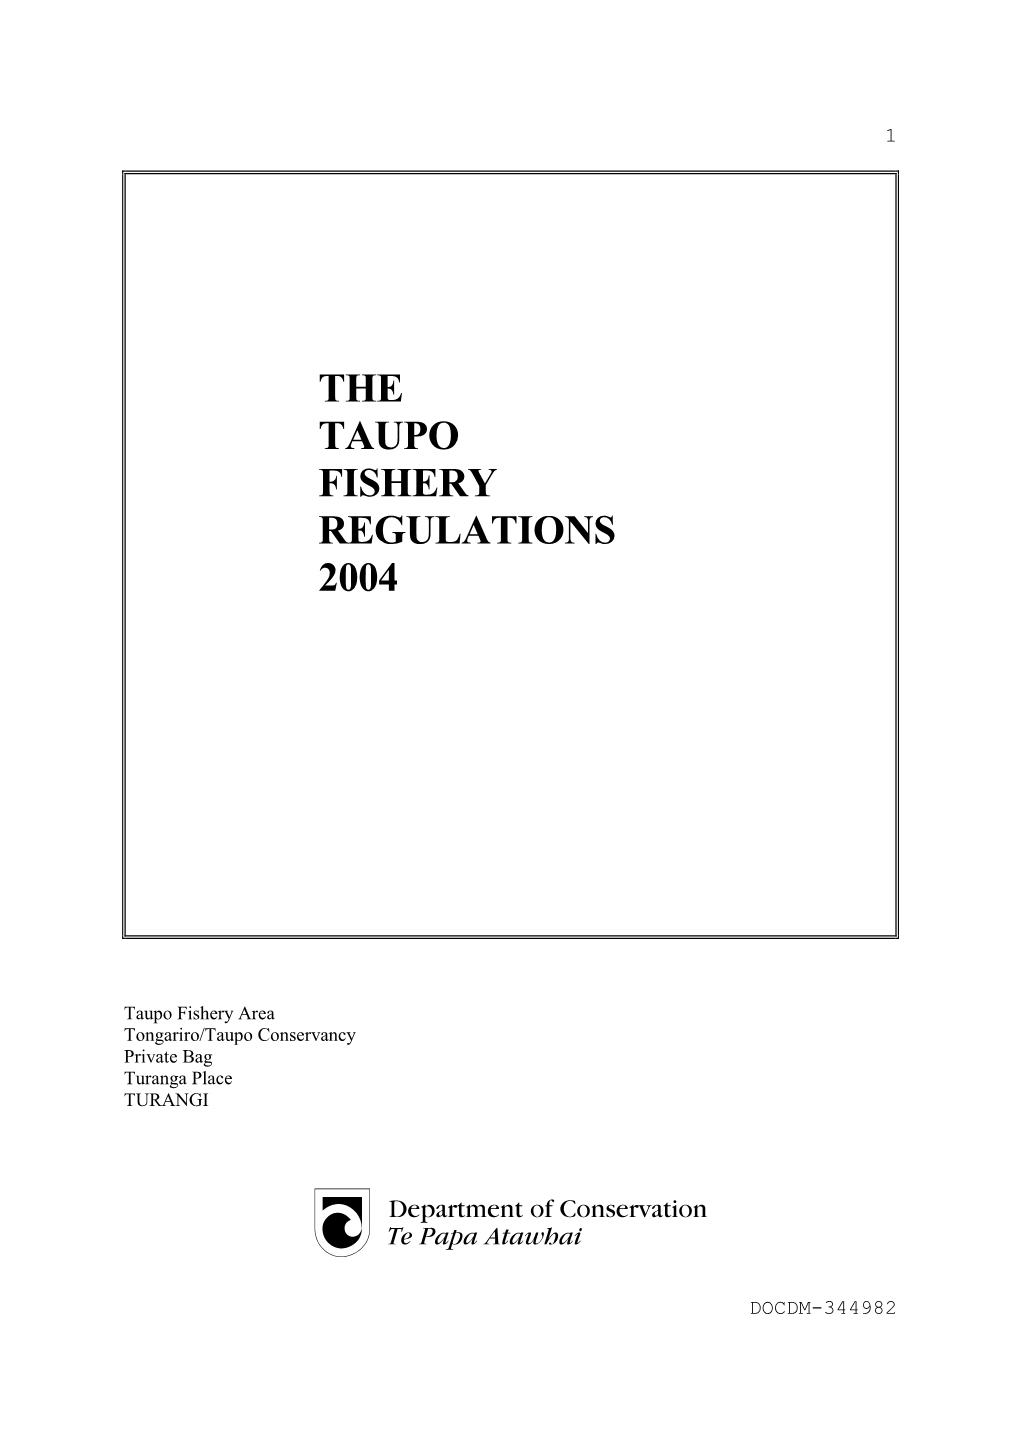 The Taupo Fishery Regulations 2004